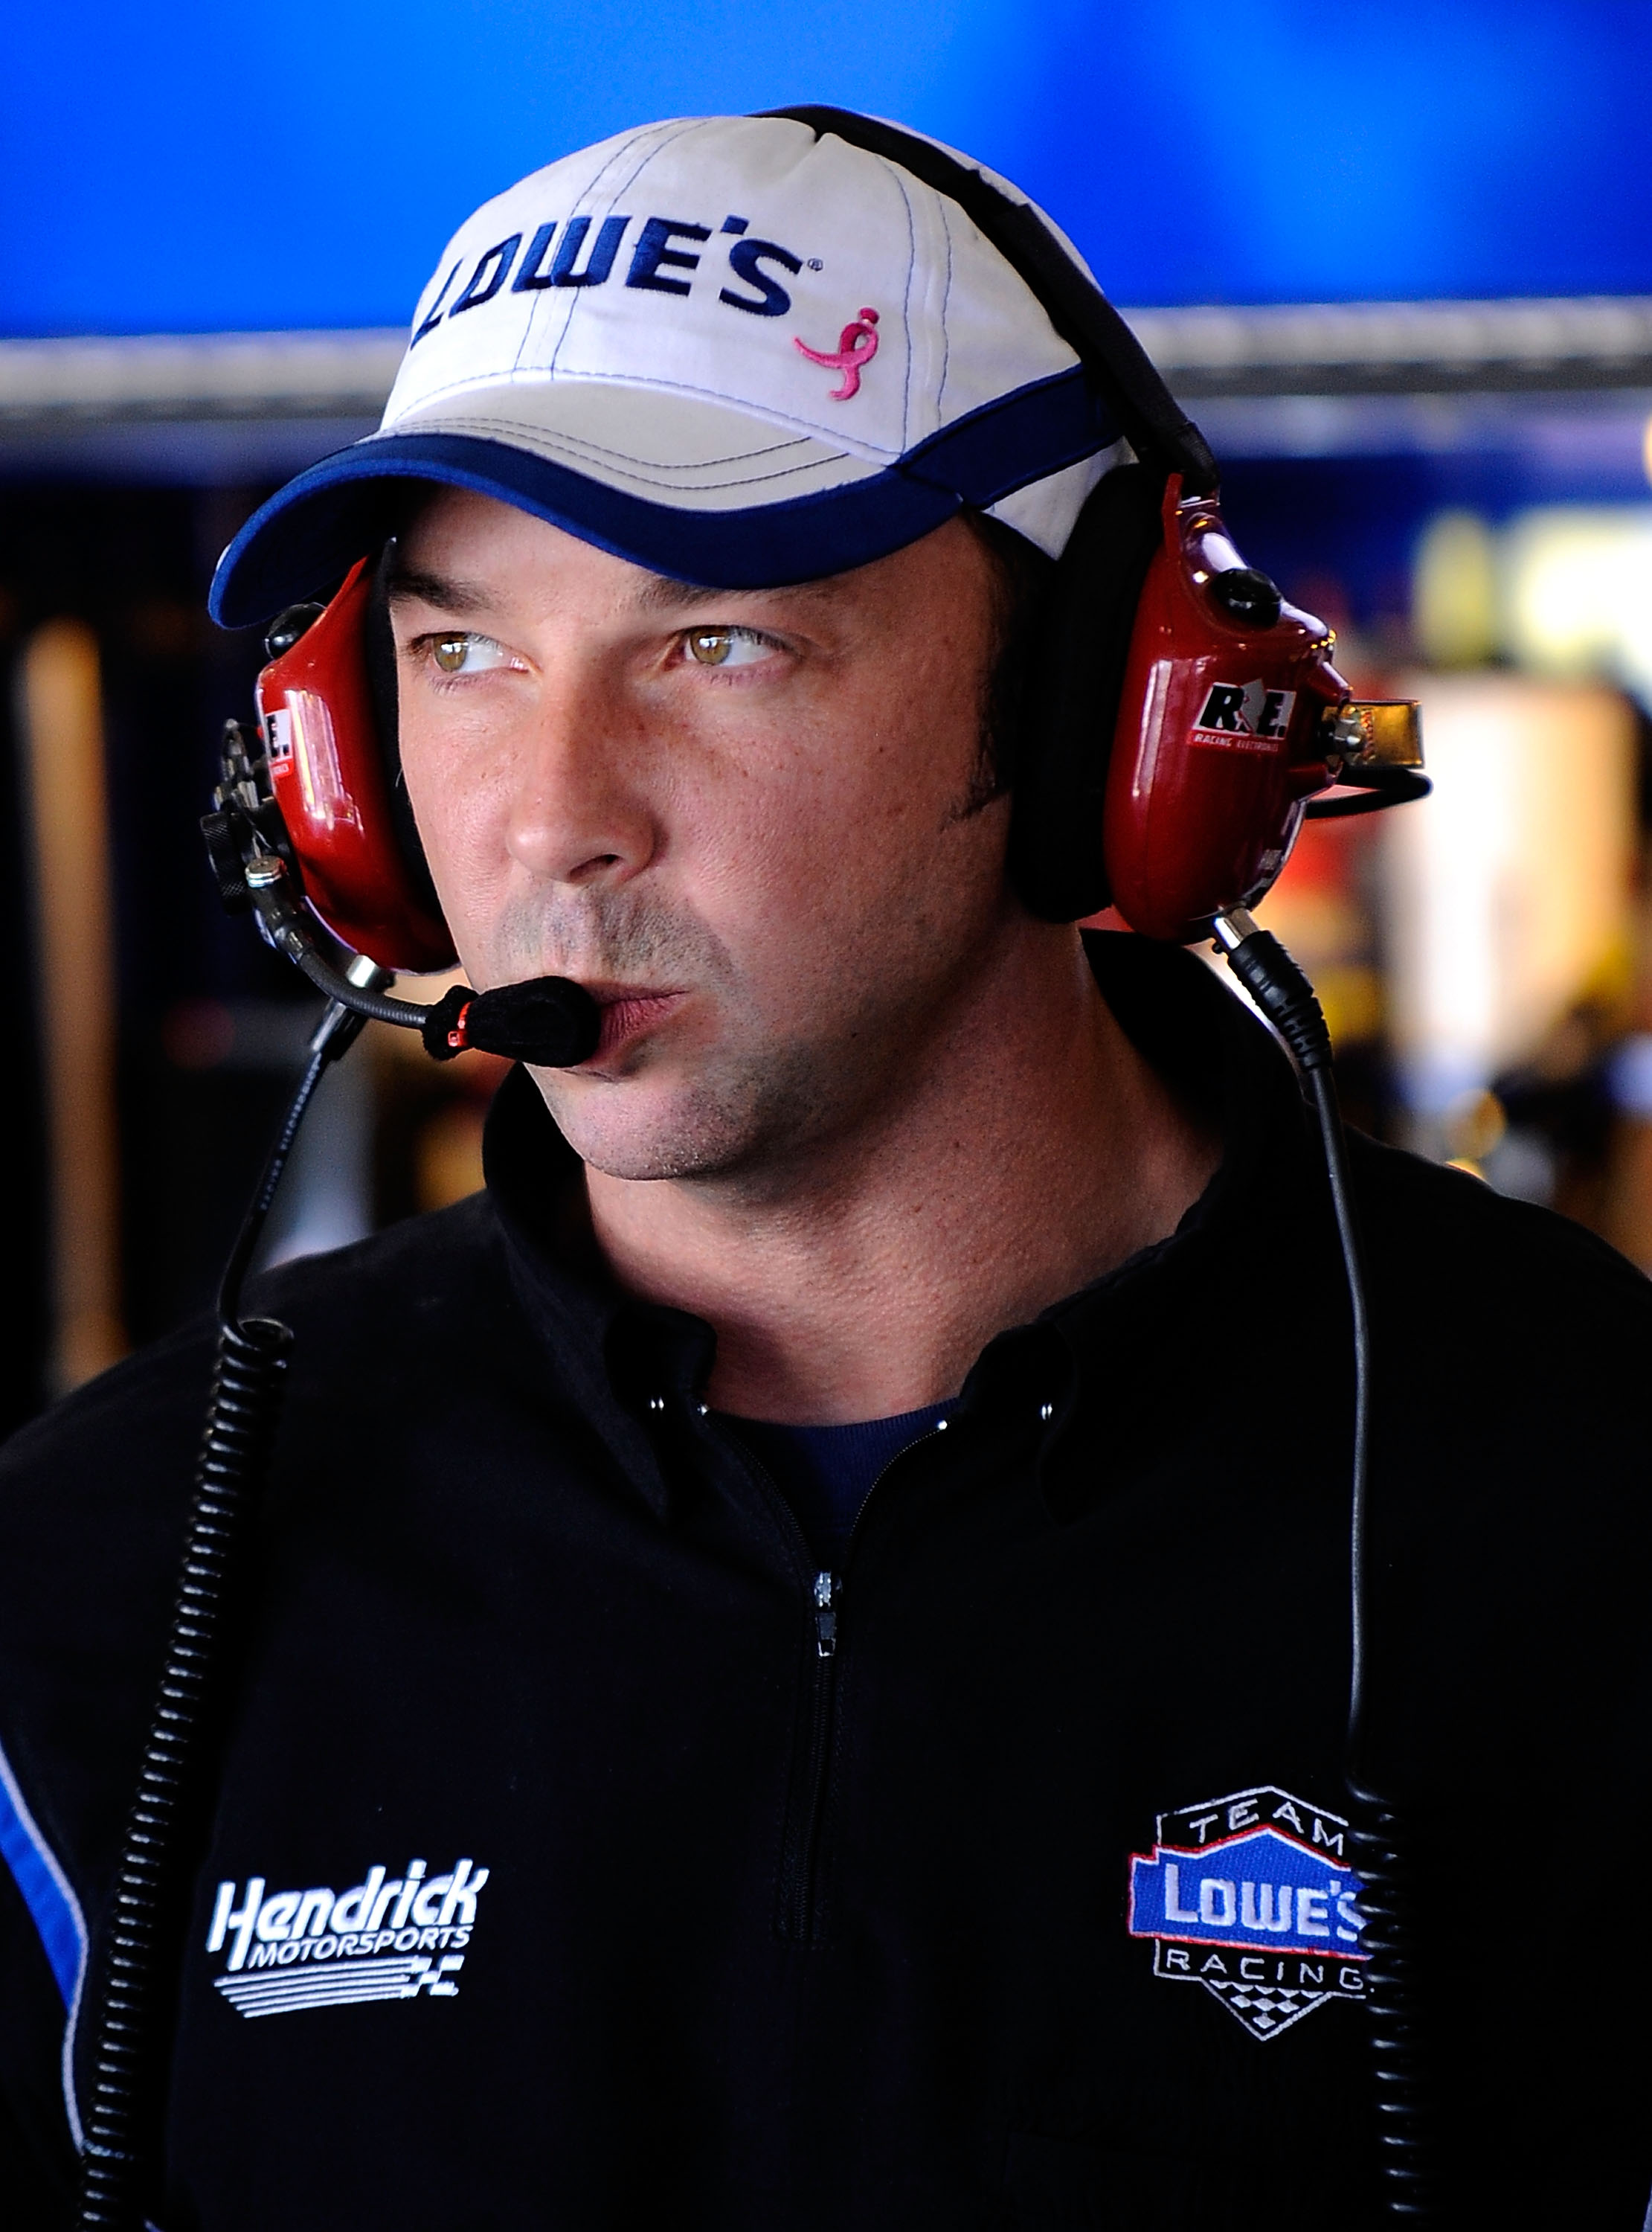 FONTANA, CA - OCTOBER 08:  Chad Knaus, crew chief for Jimmie Johnson, driver of the #48 Lowe's/Jimmie Johnson Foundation Chevrolet, stands in the garage during practice for the NASCAR Sprint Cup Series Pepsi Max 400 on October 8, 2010 in Fontana, Californ